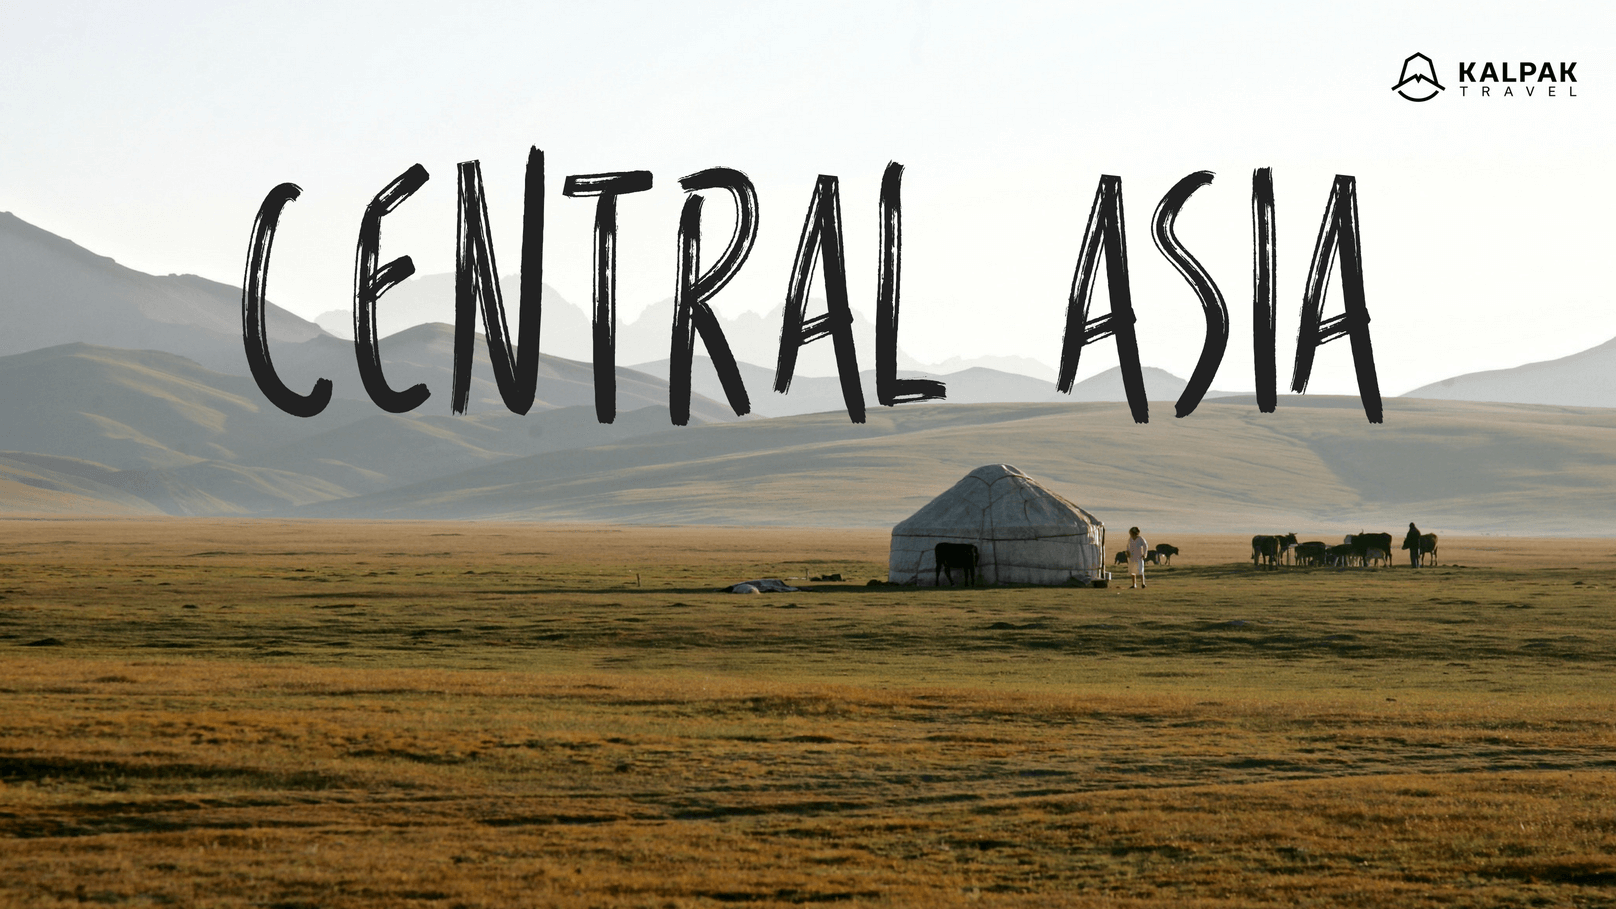 Central Asia caption on a landscape photo with a yurt